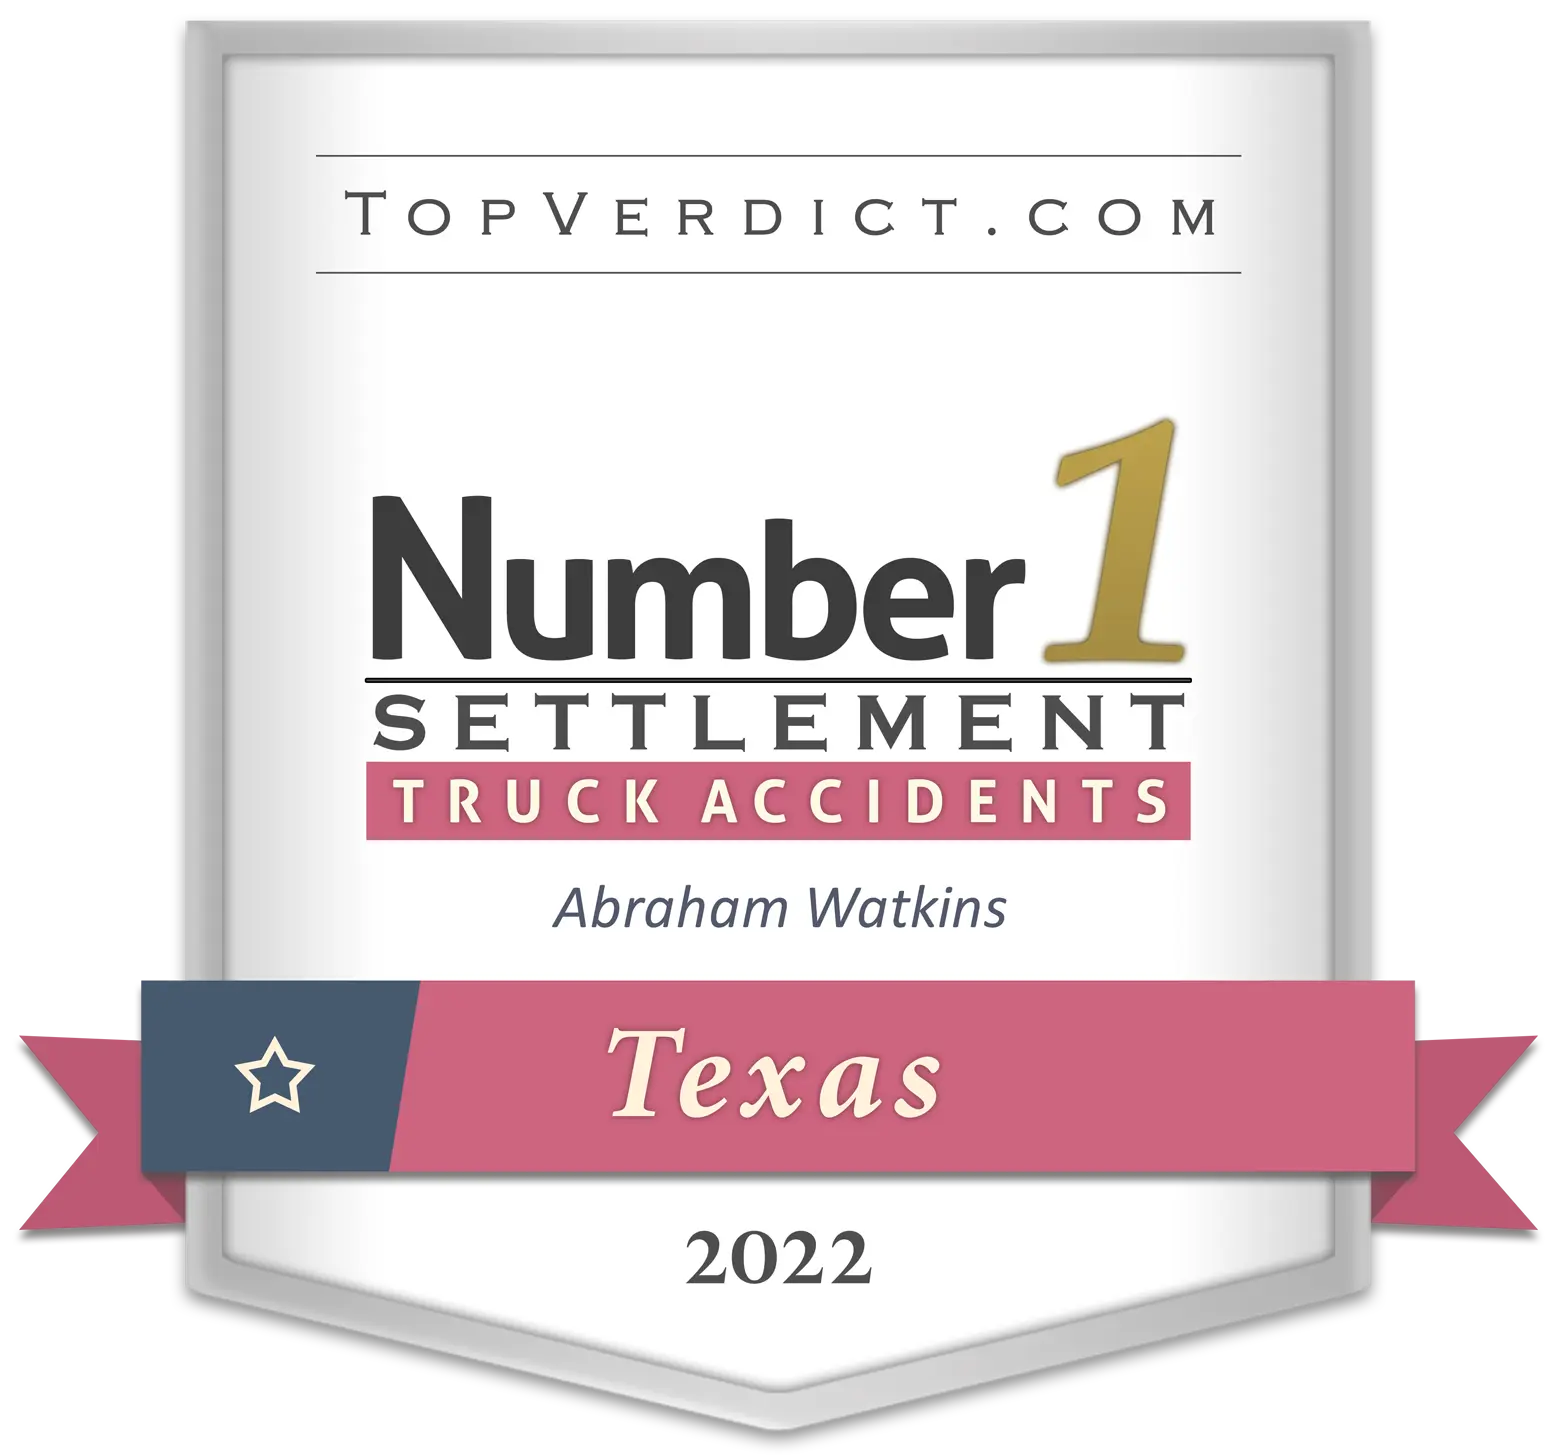 Number 1 for Wrongful Death Settlements in TX for 2022.